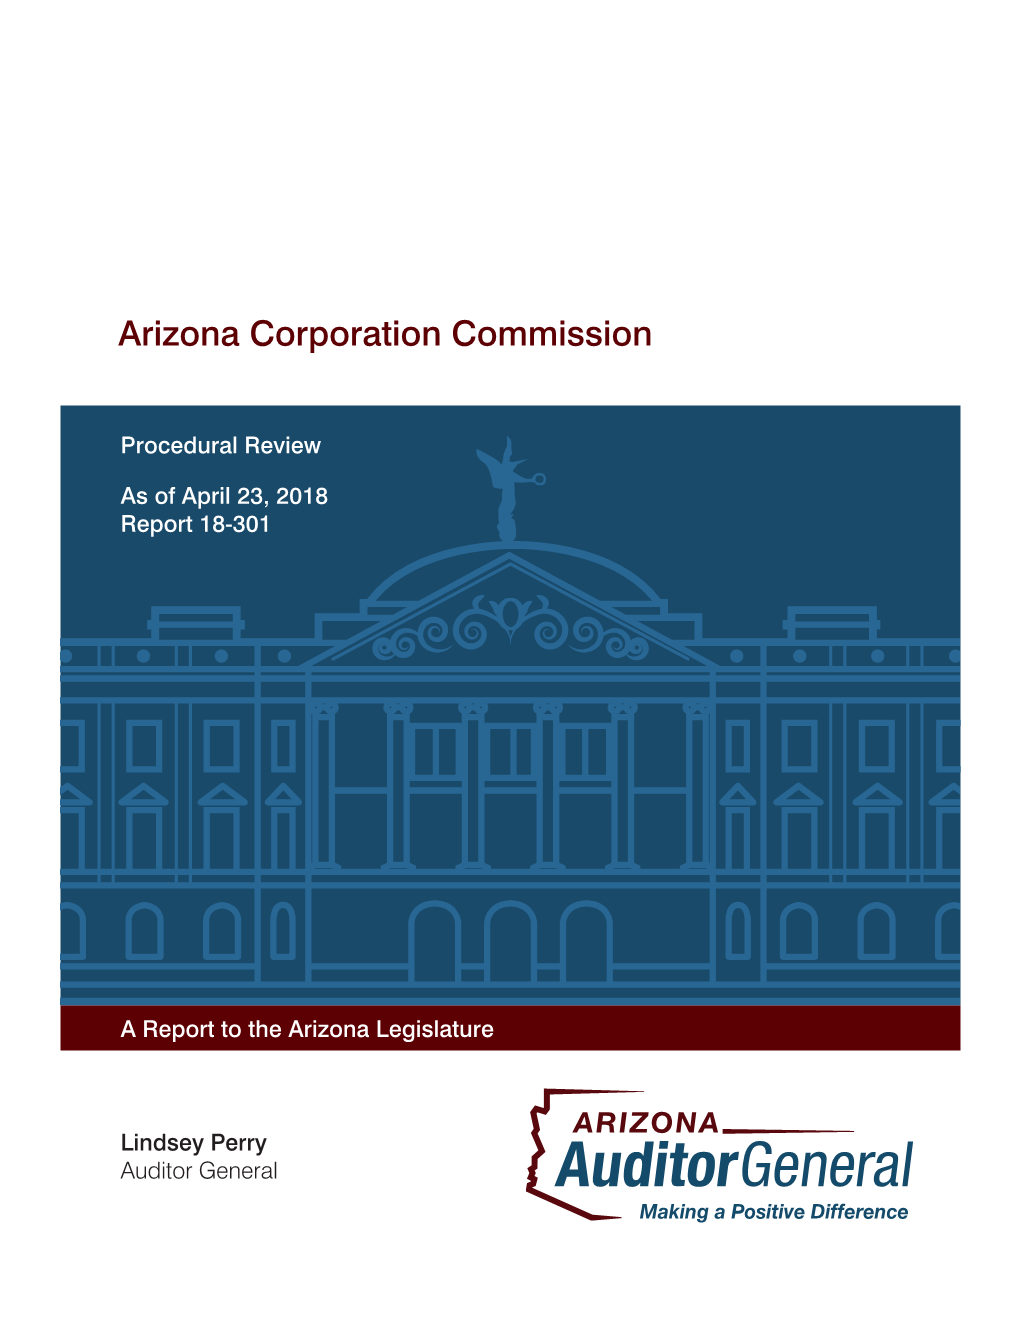 Arizona Corporation Commission Procedural Review As of April 23